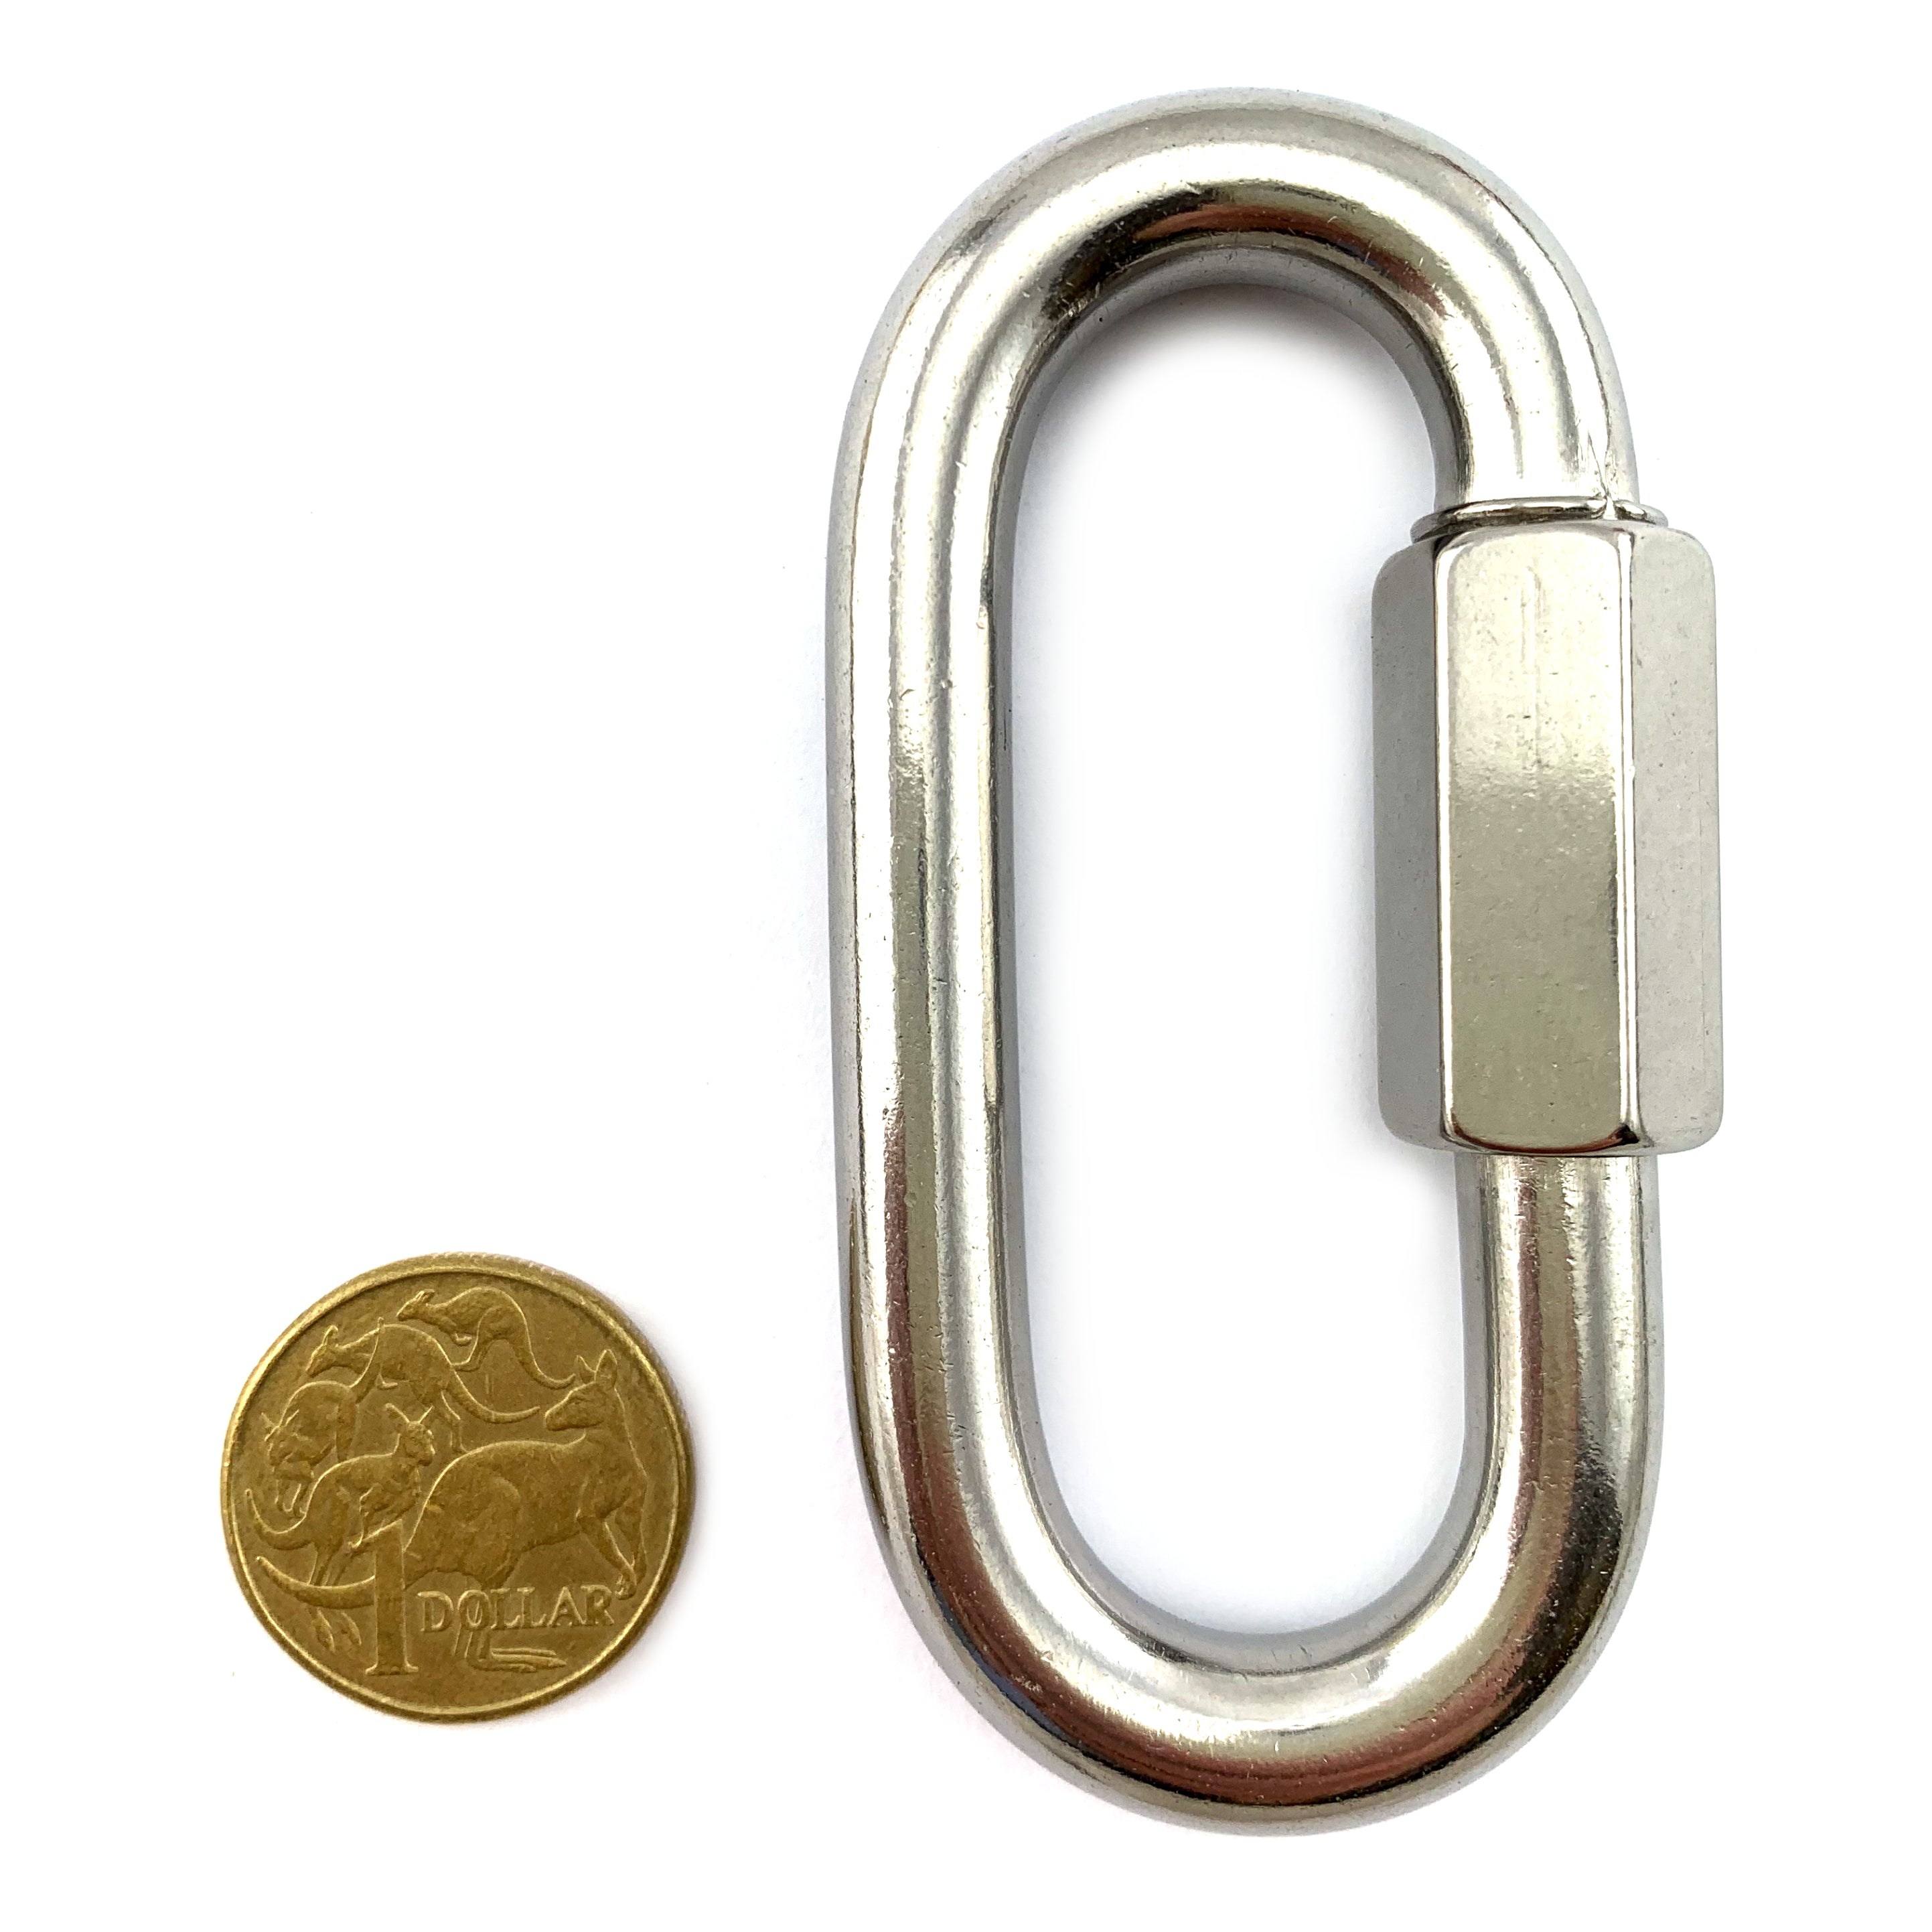 Quick Link - Stainless Steel Type 316 - 10mm. Australia.